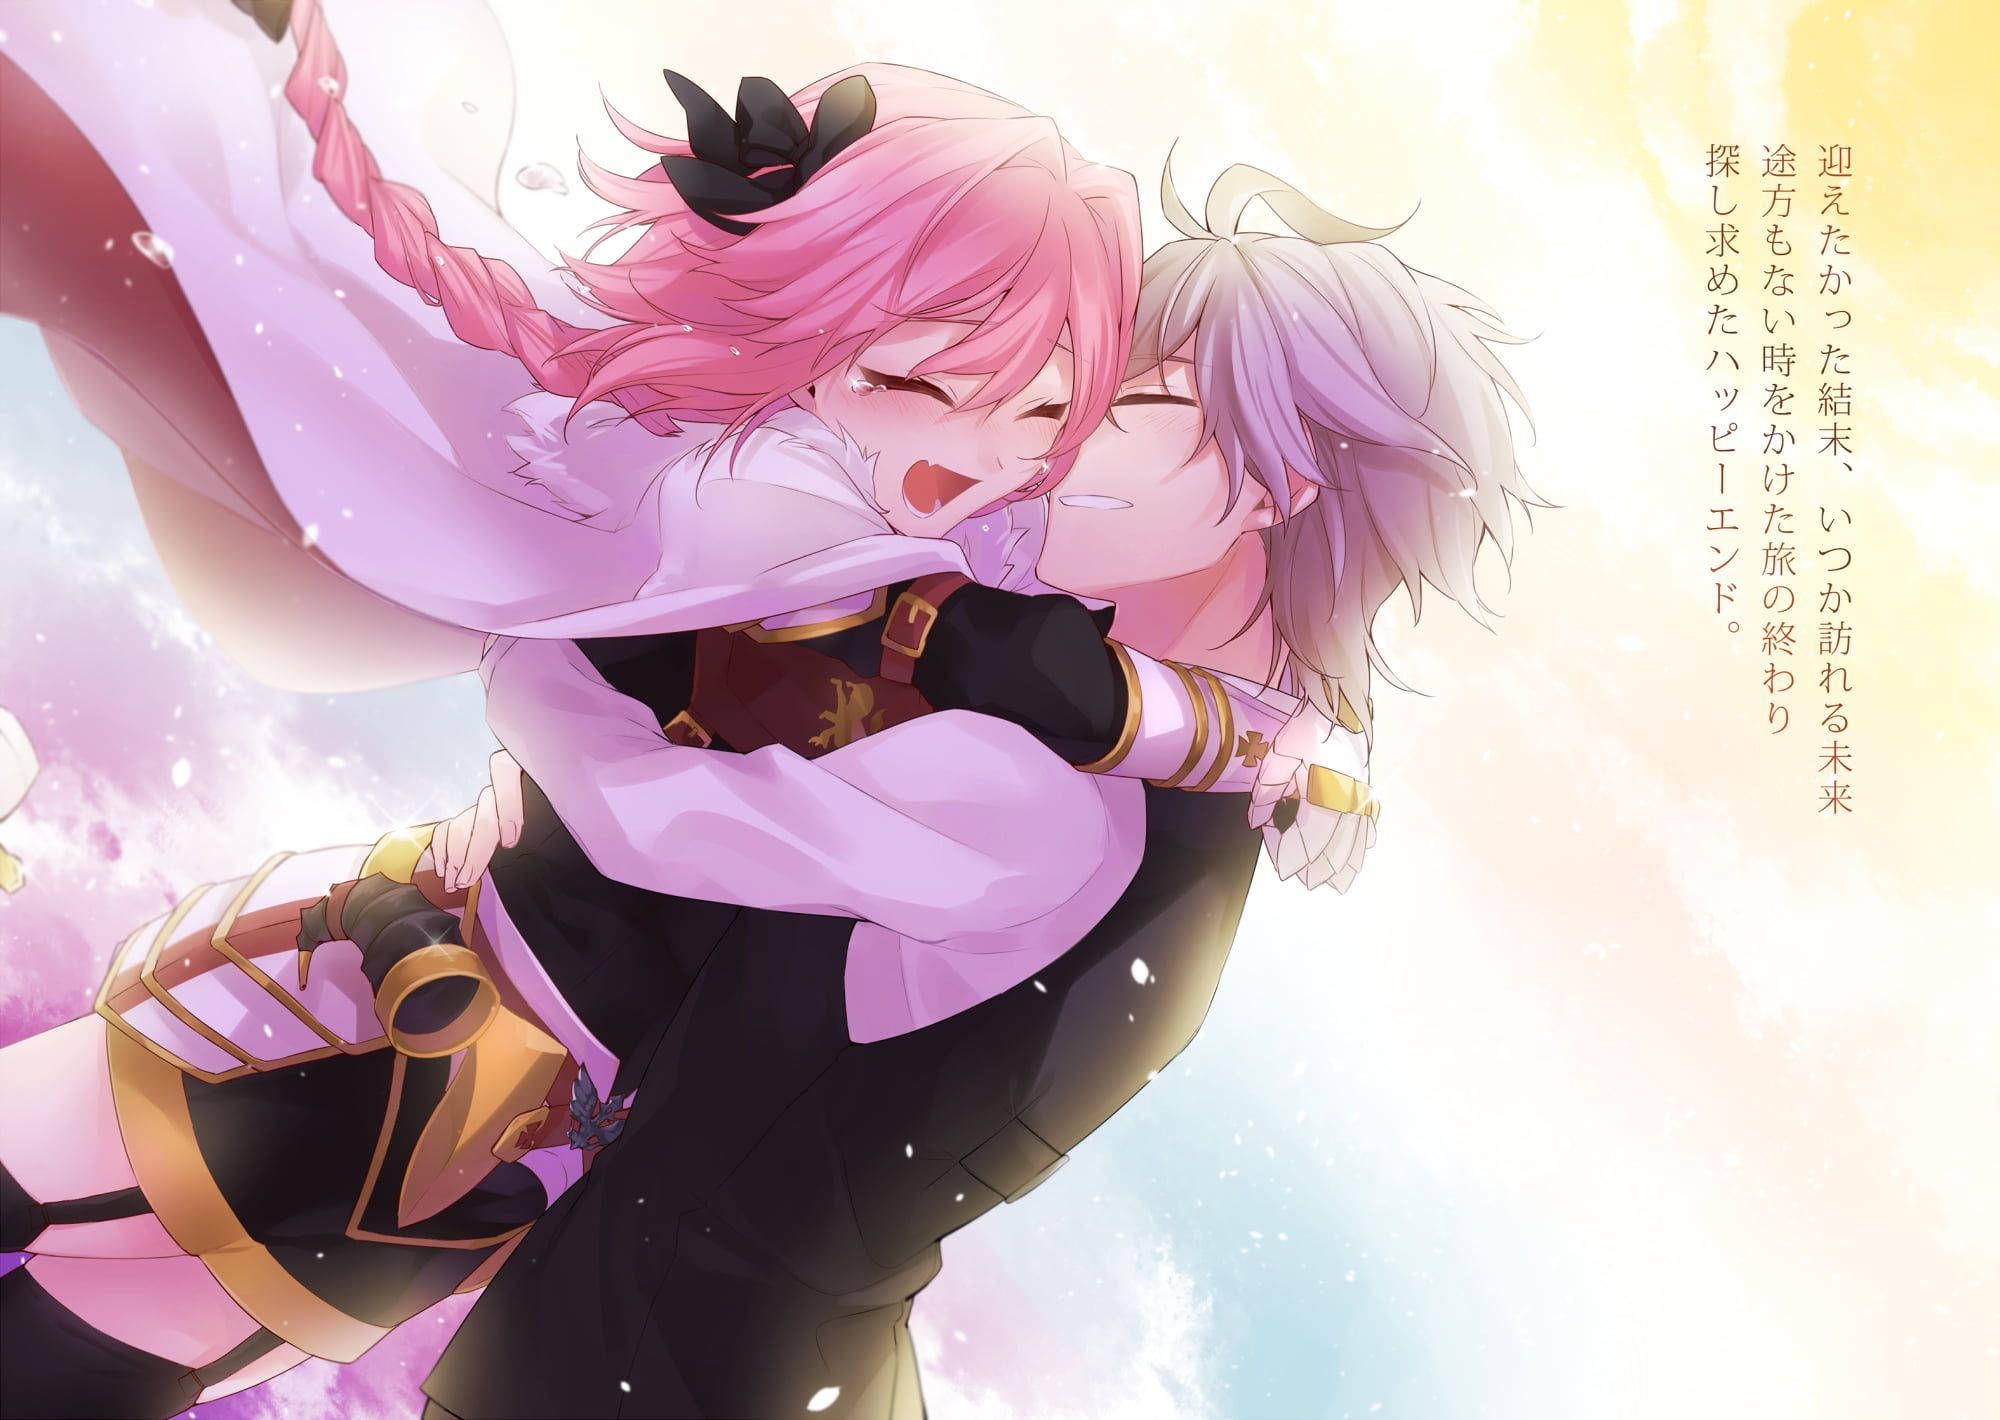 Astolfo And Sieg Poster Background